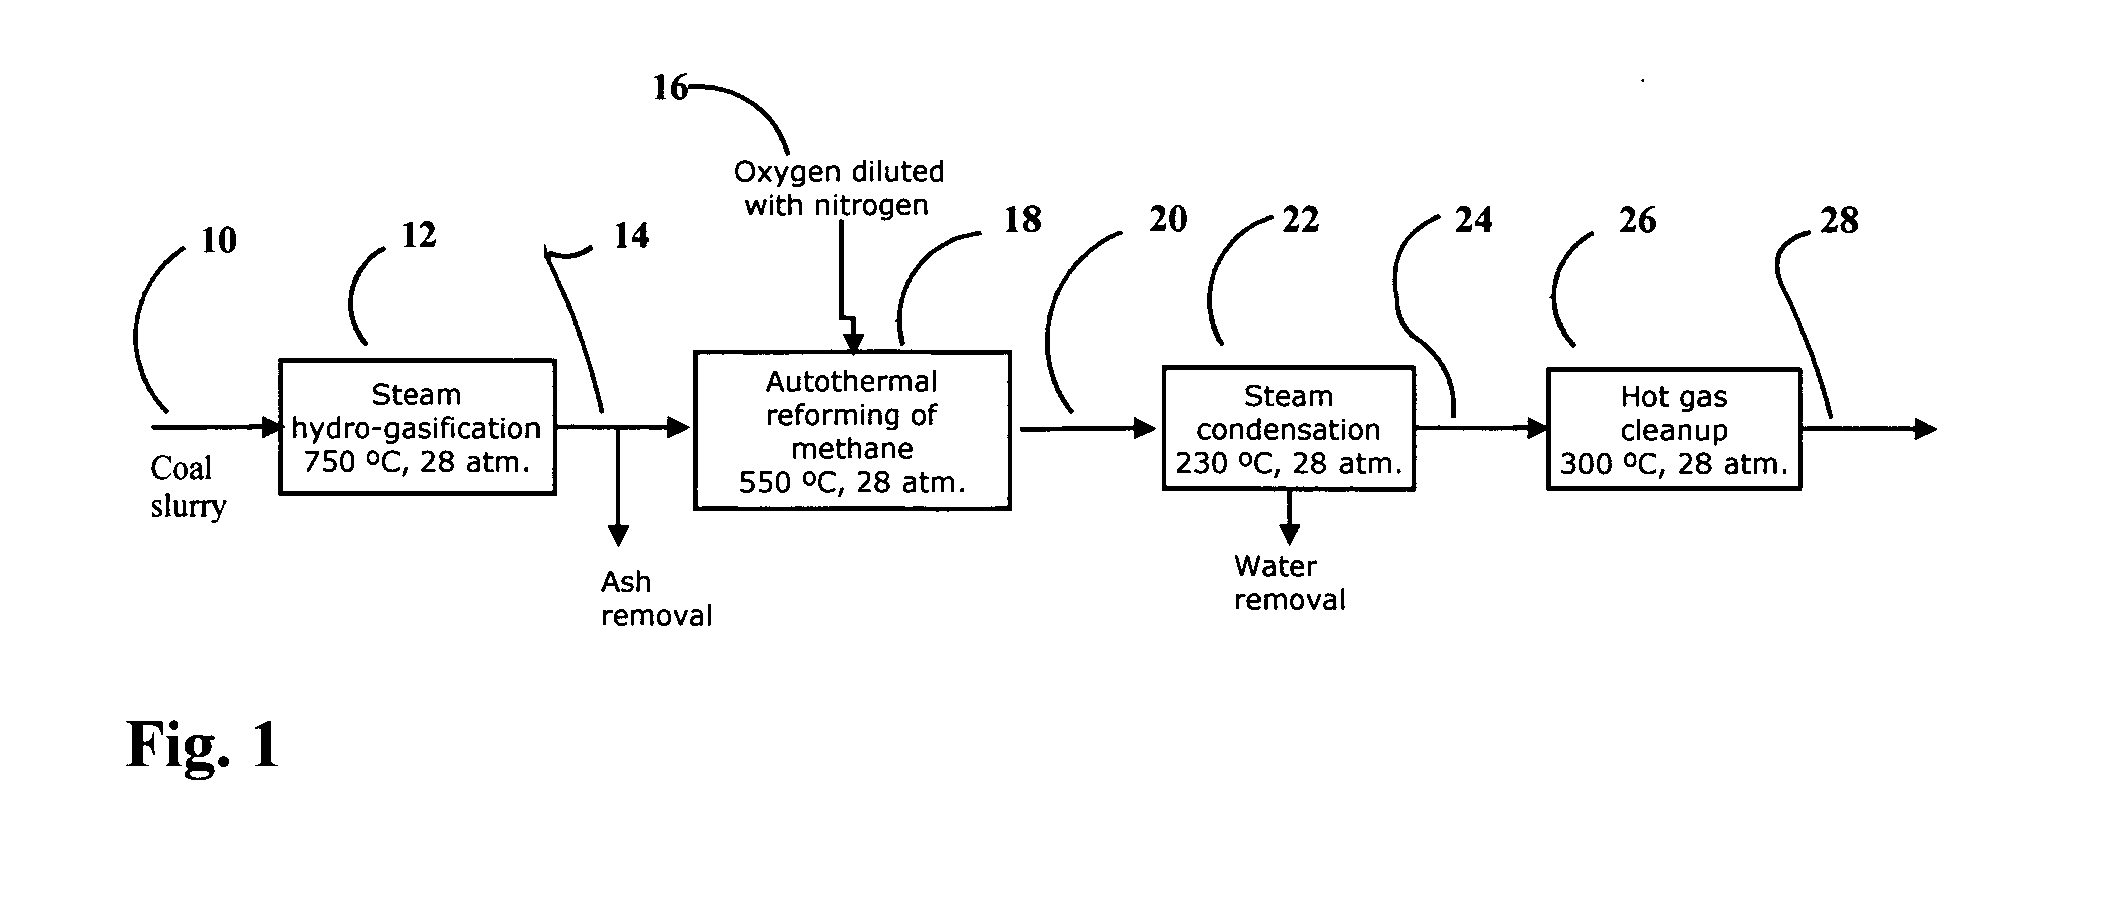 Process for enhancing the operability of hot gas cleanup for the production of synthesis gas from steam-hydrogasification producer gas